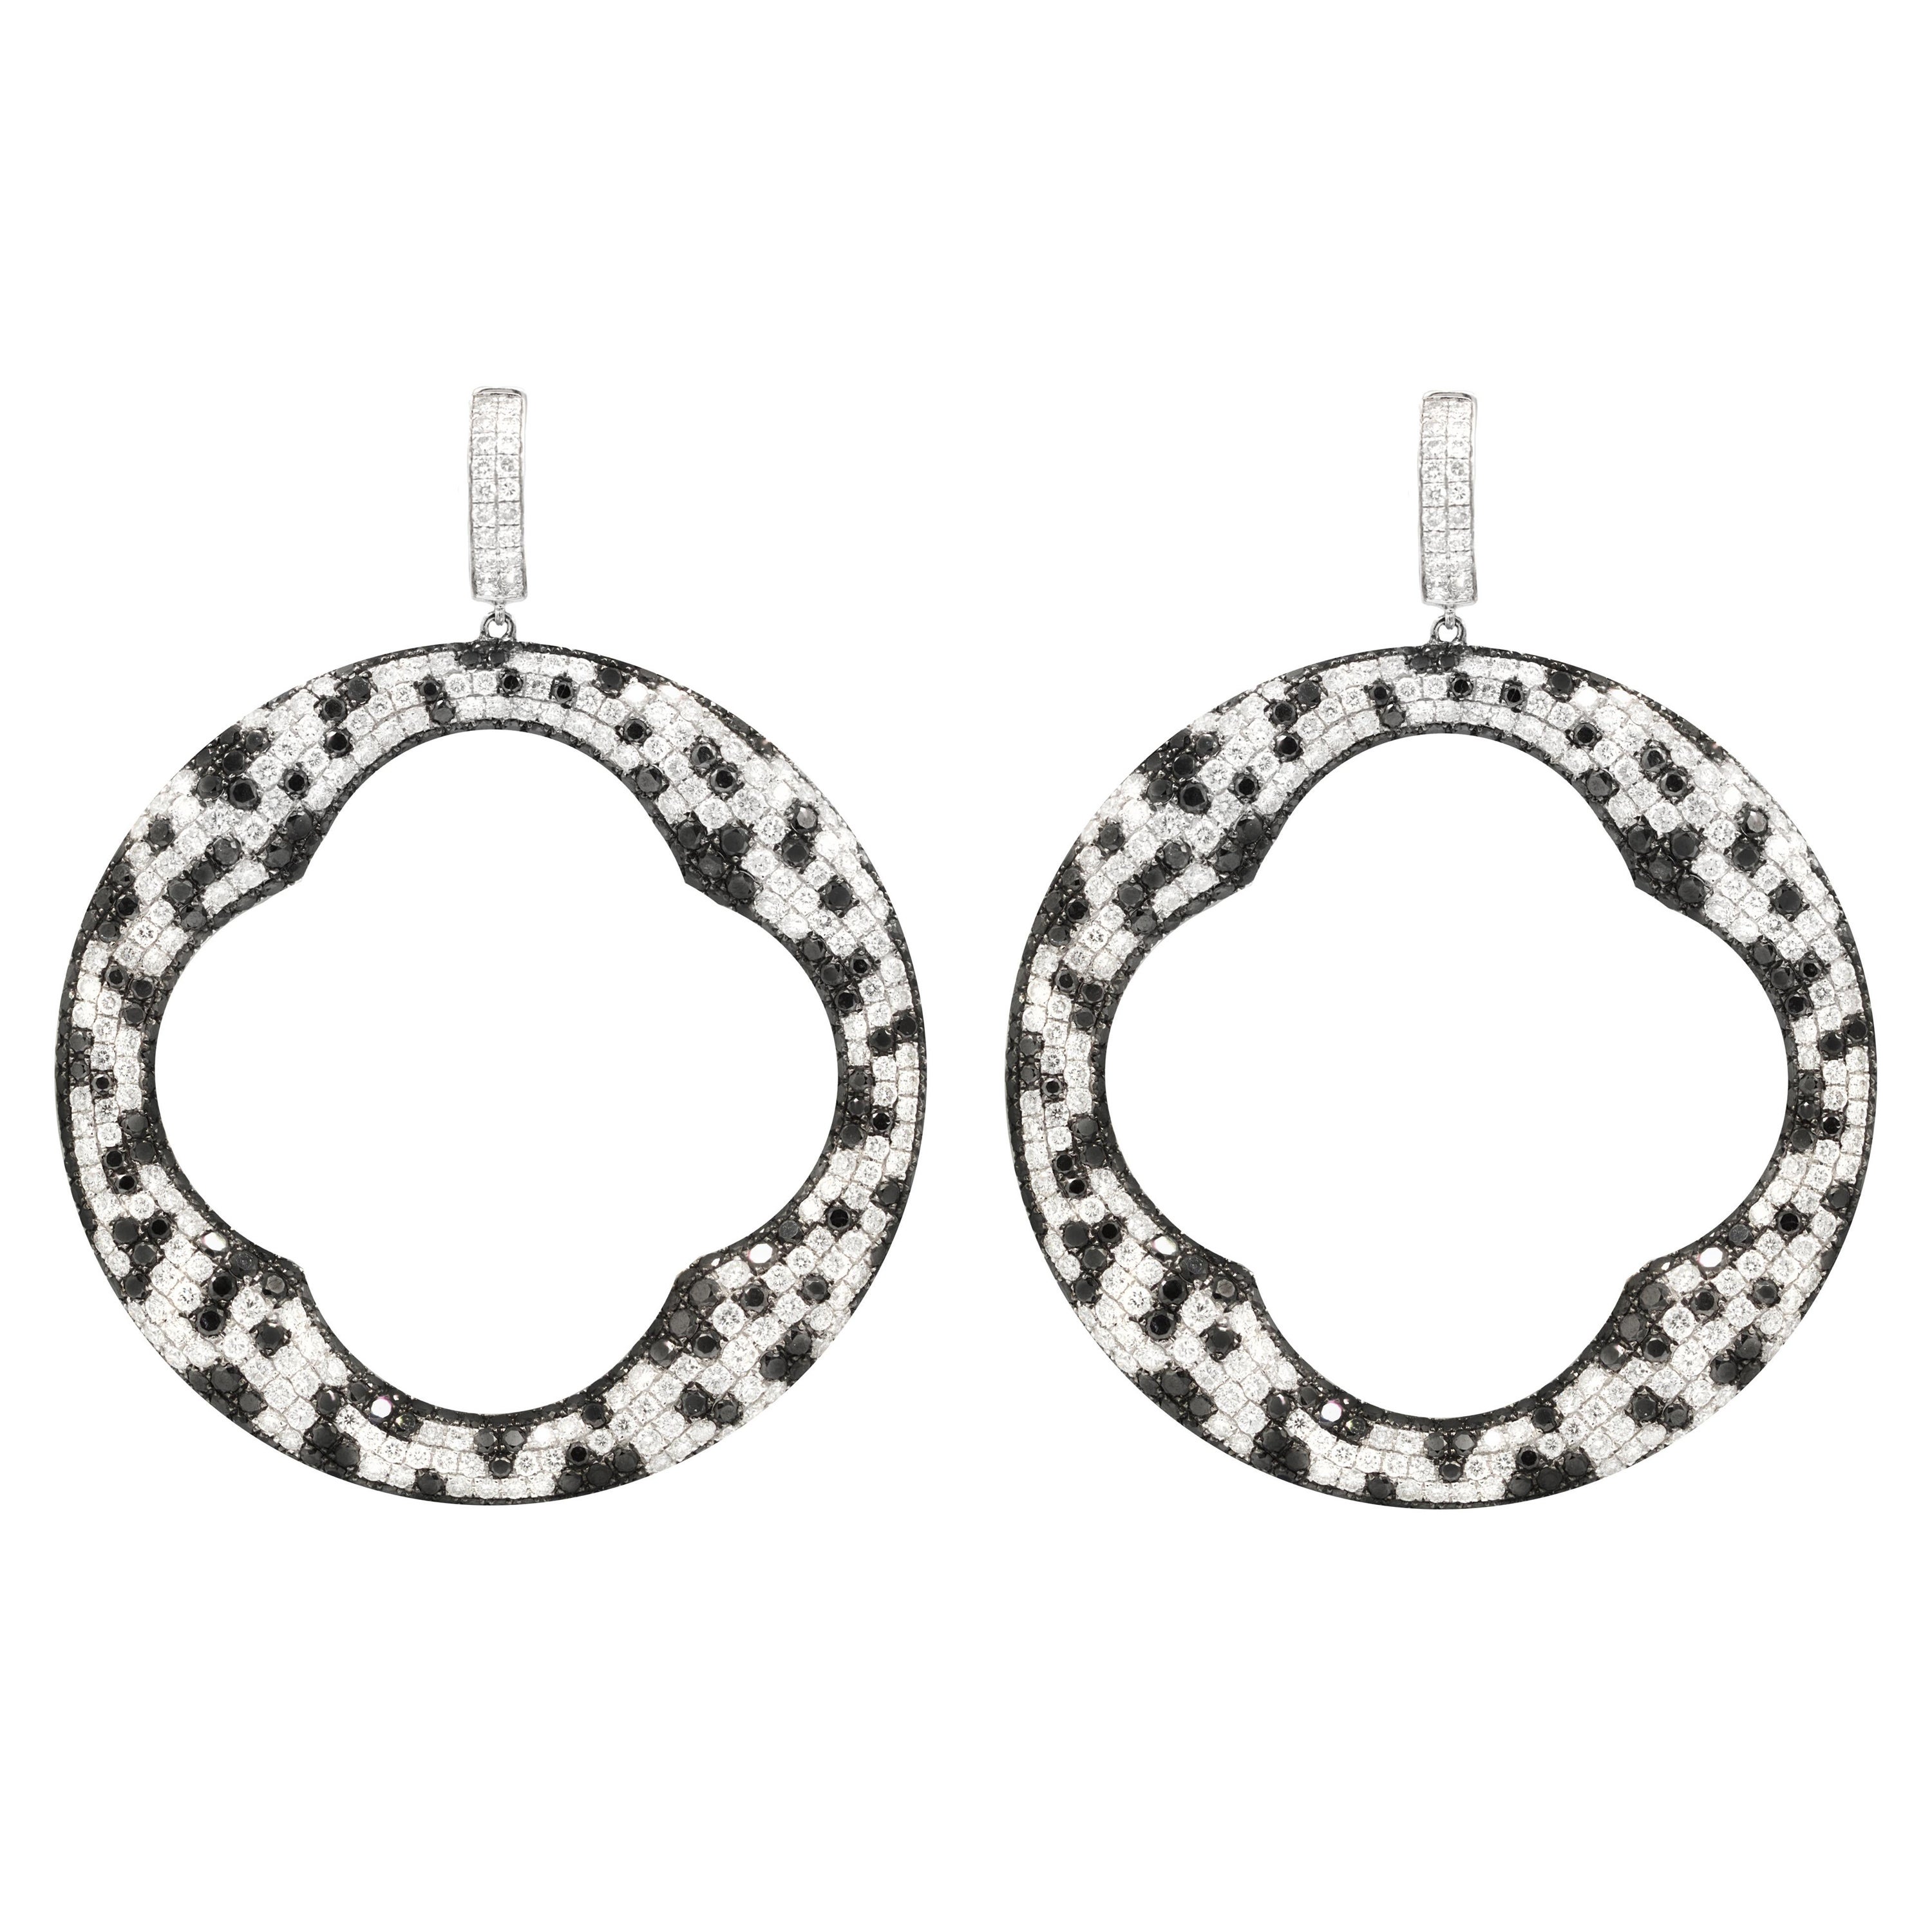 18K white gold earrings with 25.00 carats of black and white diamonds